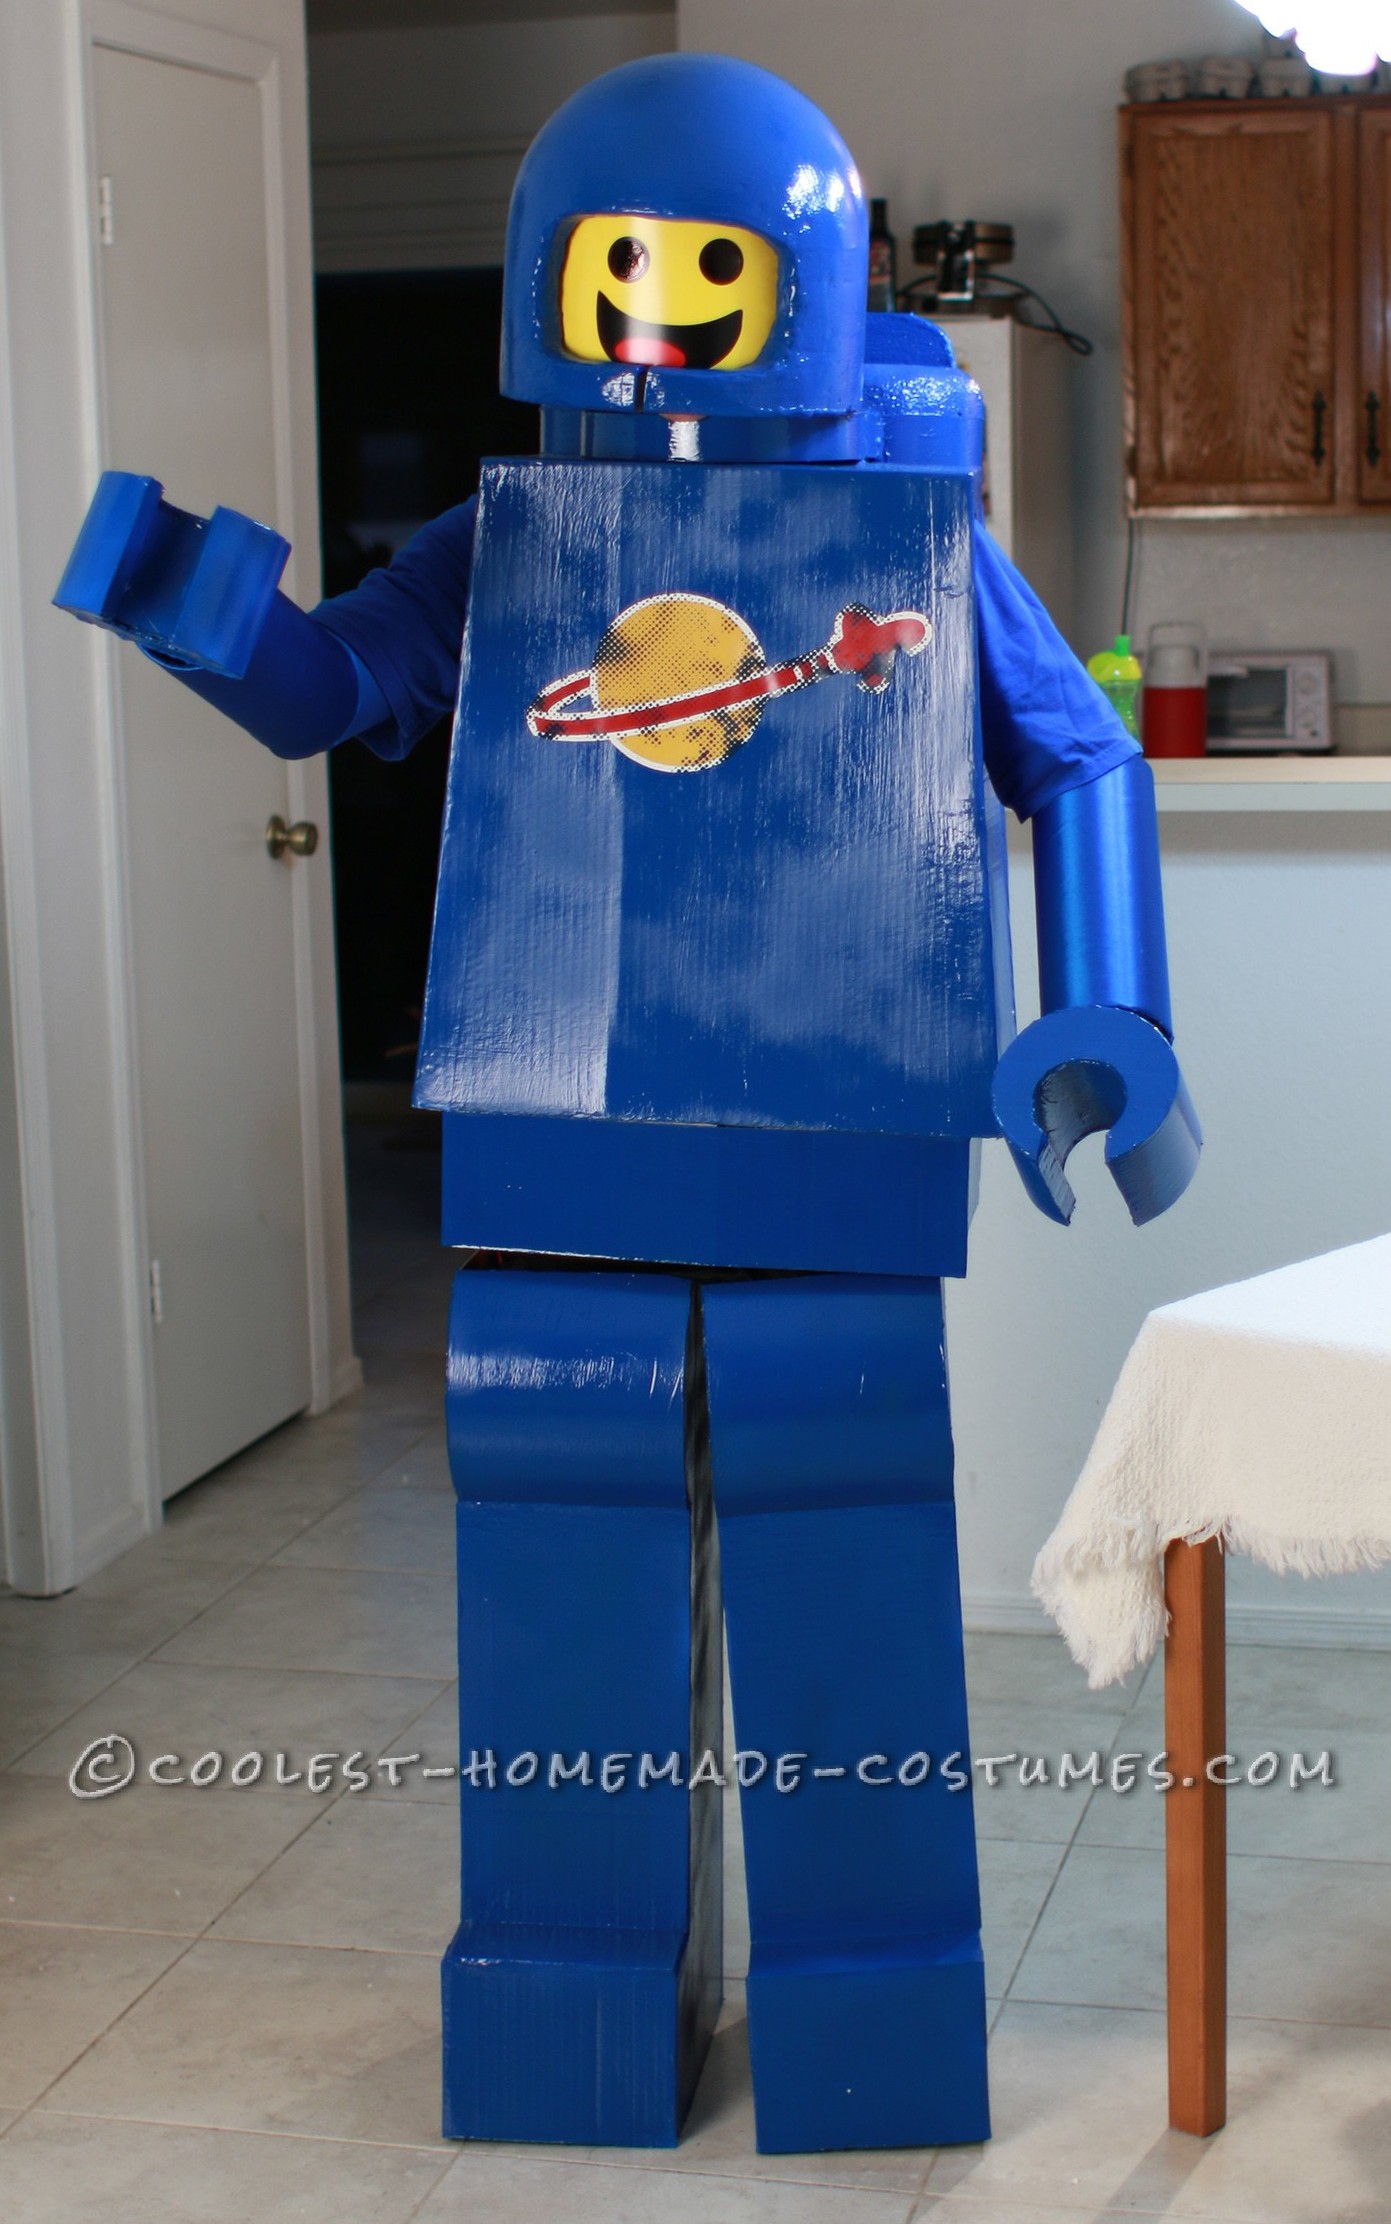 Awesome Lego Benny Costume from the Lego Movie